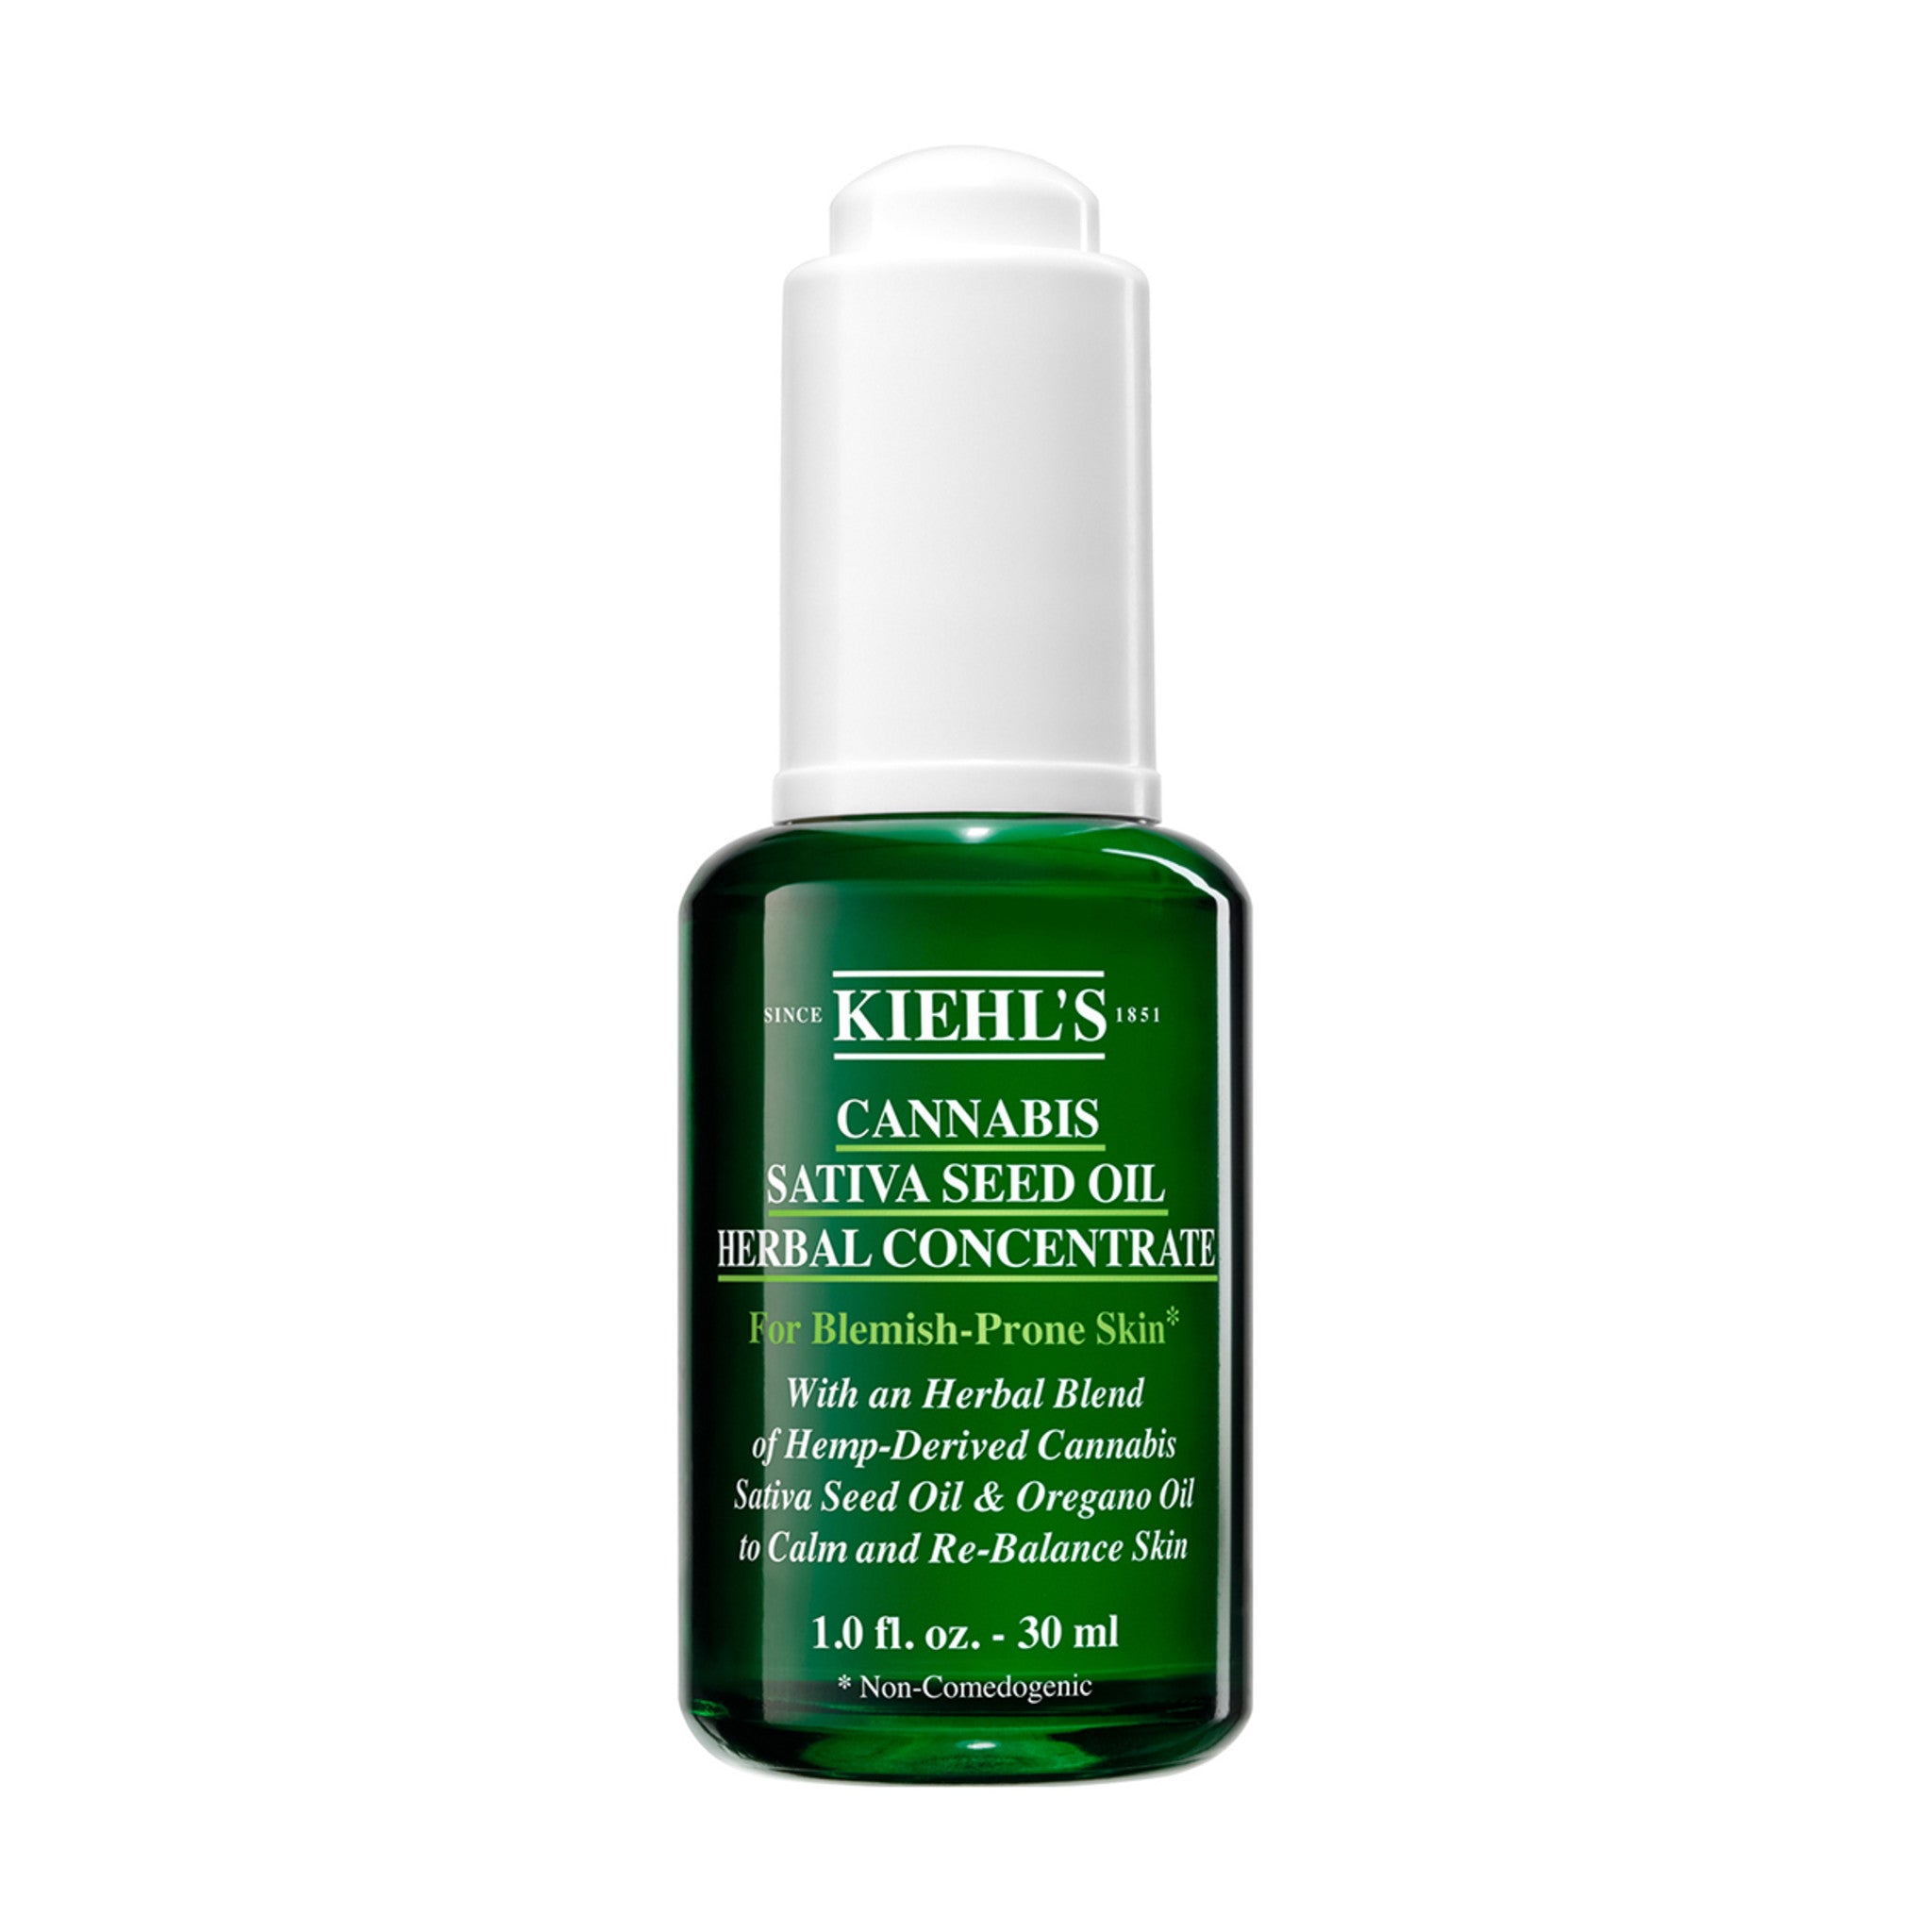 Kiehl's Since 1851 Cannabis Sativa Seed Oil Herbal Concentrate main image.